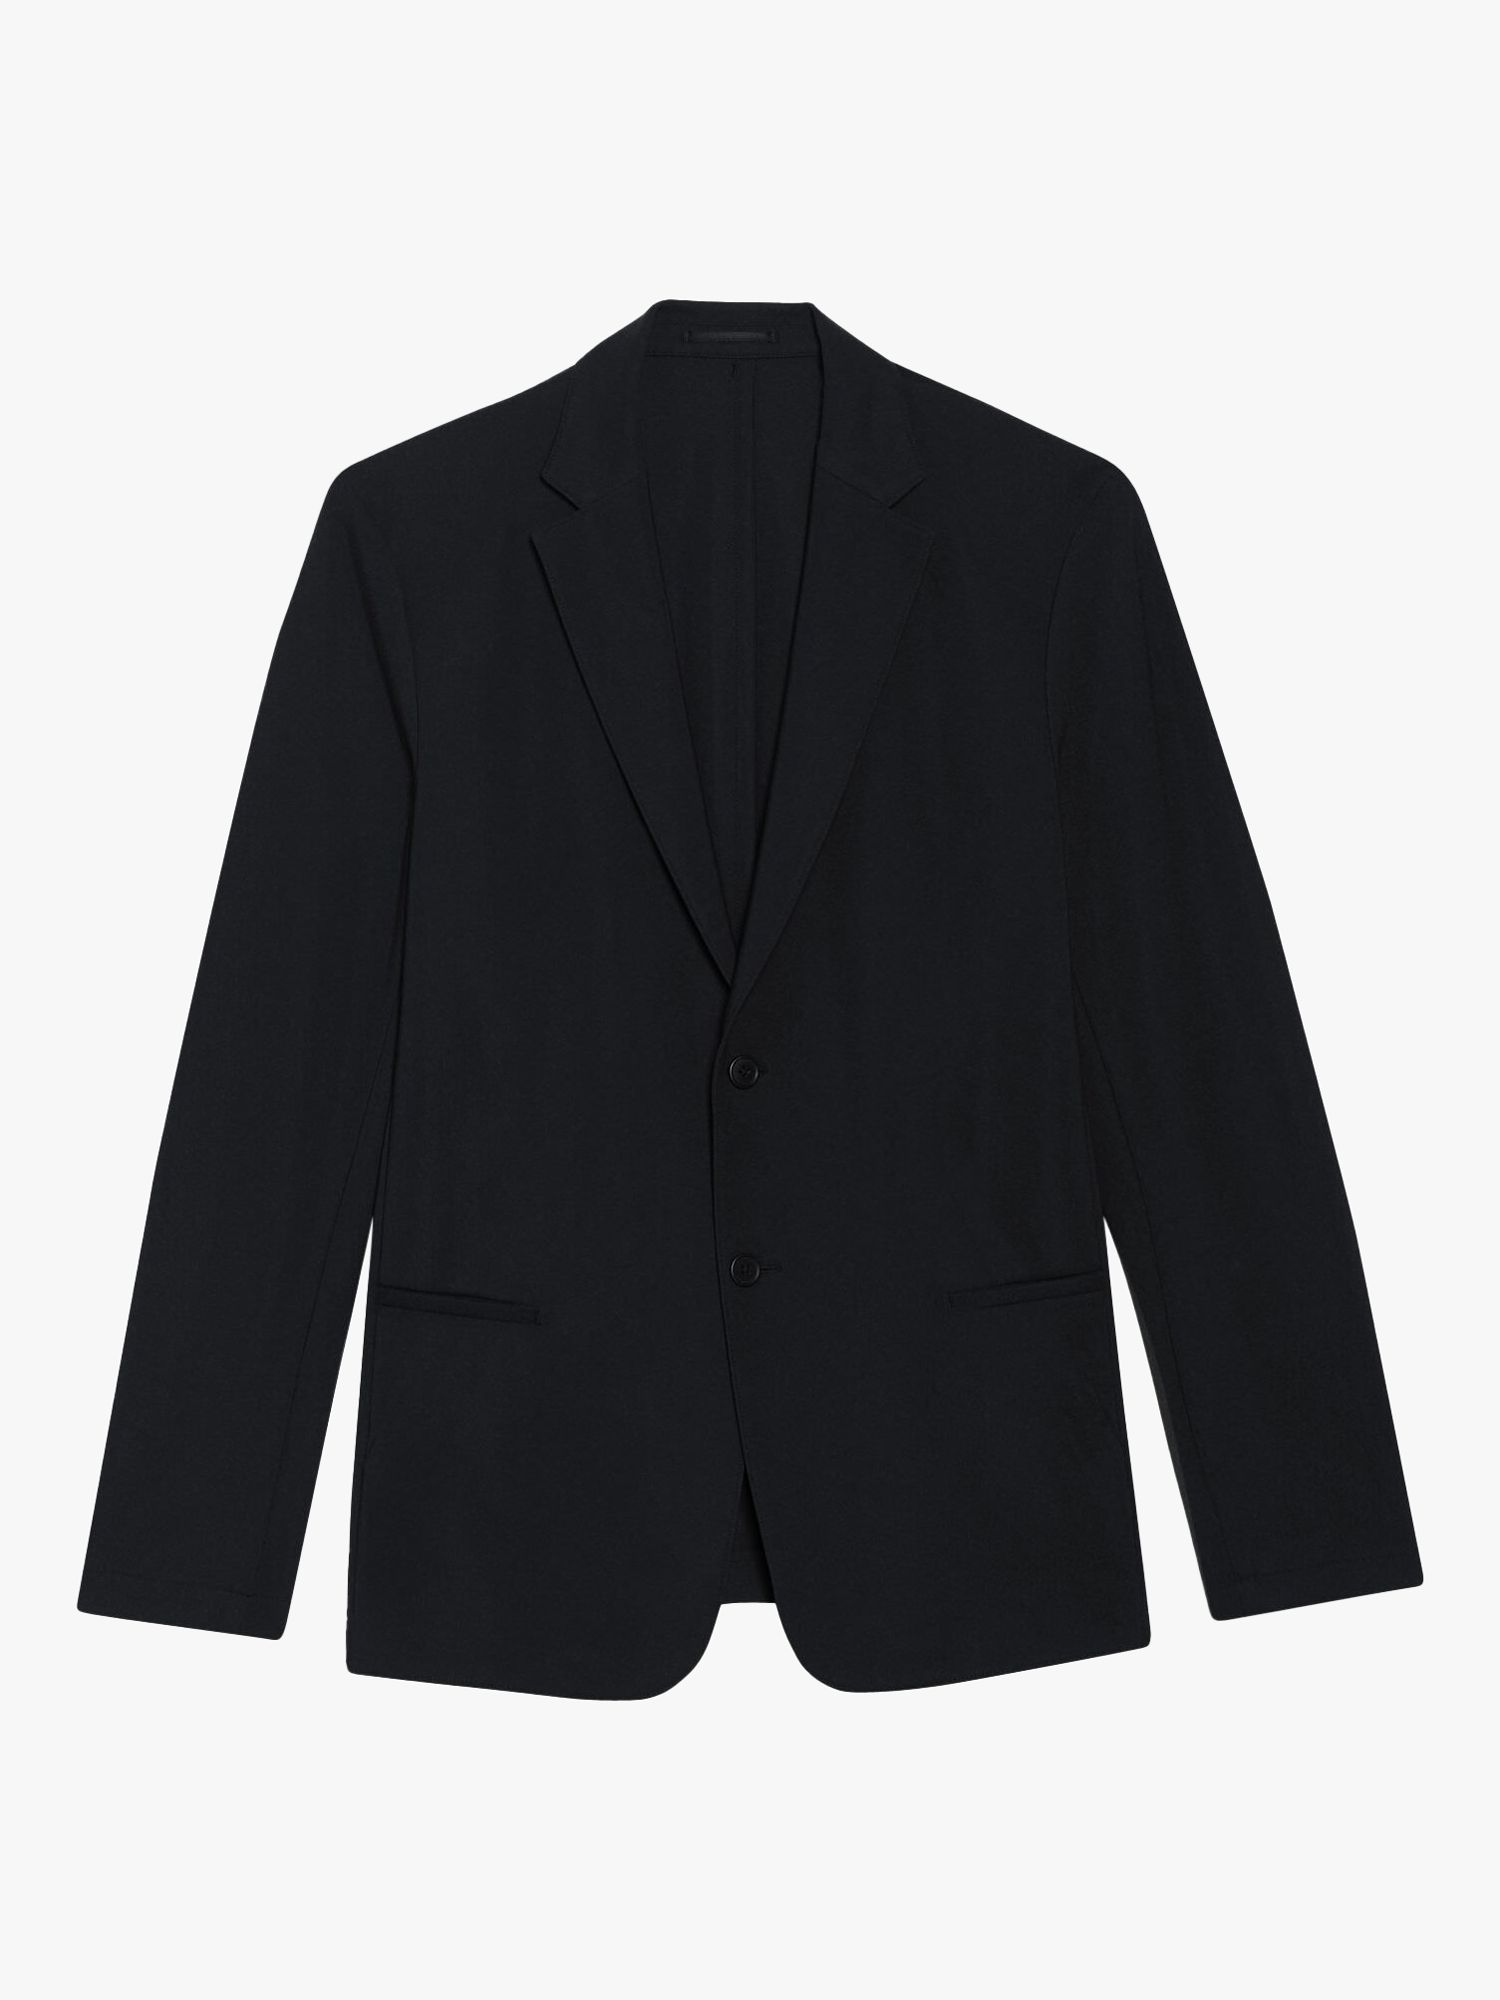 Buy Theory Clinton Tailored Suit Jacket Online at johnlewis.com